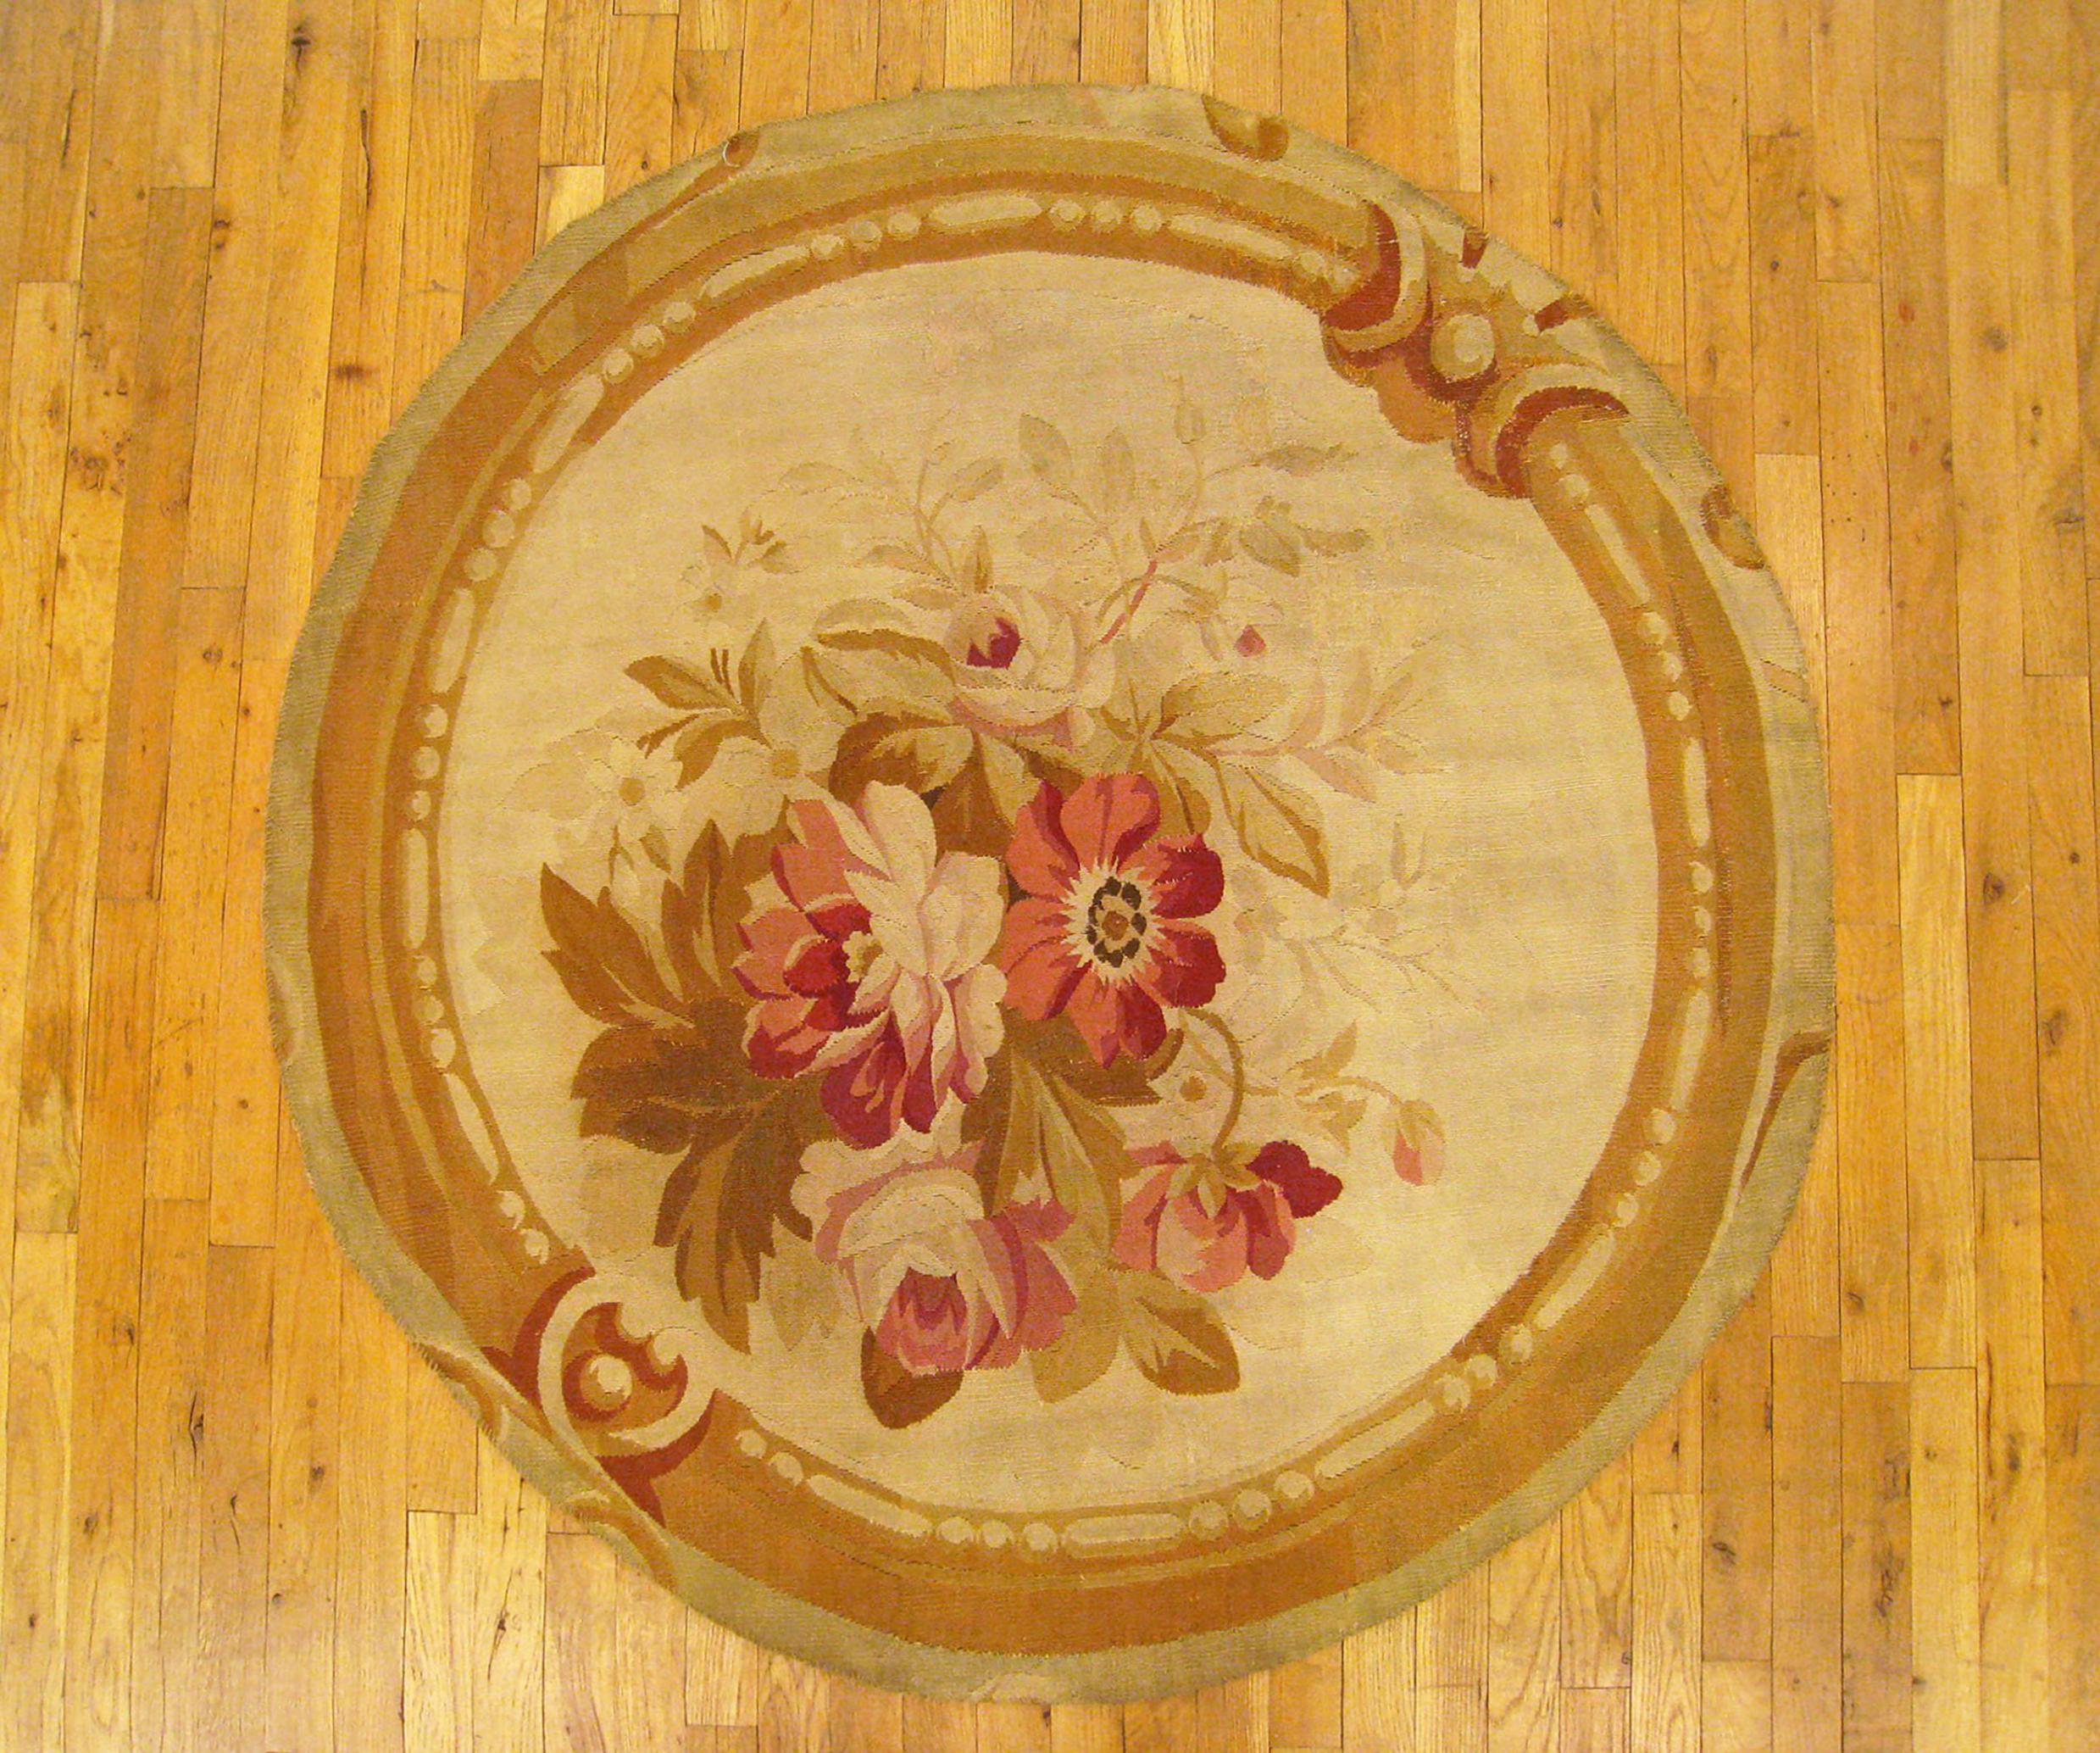 Antique French Aubusson rug, small size, circa 1890.

A one-of-a-kind antique French Aubusson Carpet, hand-knotted with soft wool pile. Featuring floral elements on the open ivory primary field, with a delicate brown outer border. In small size,